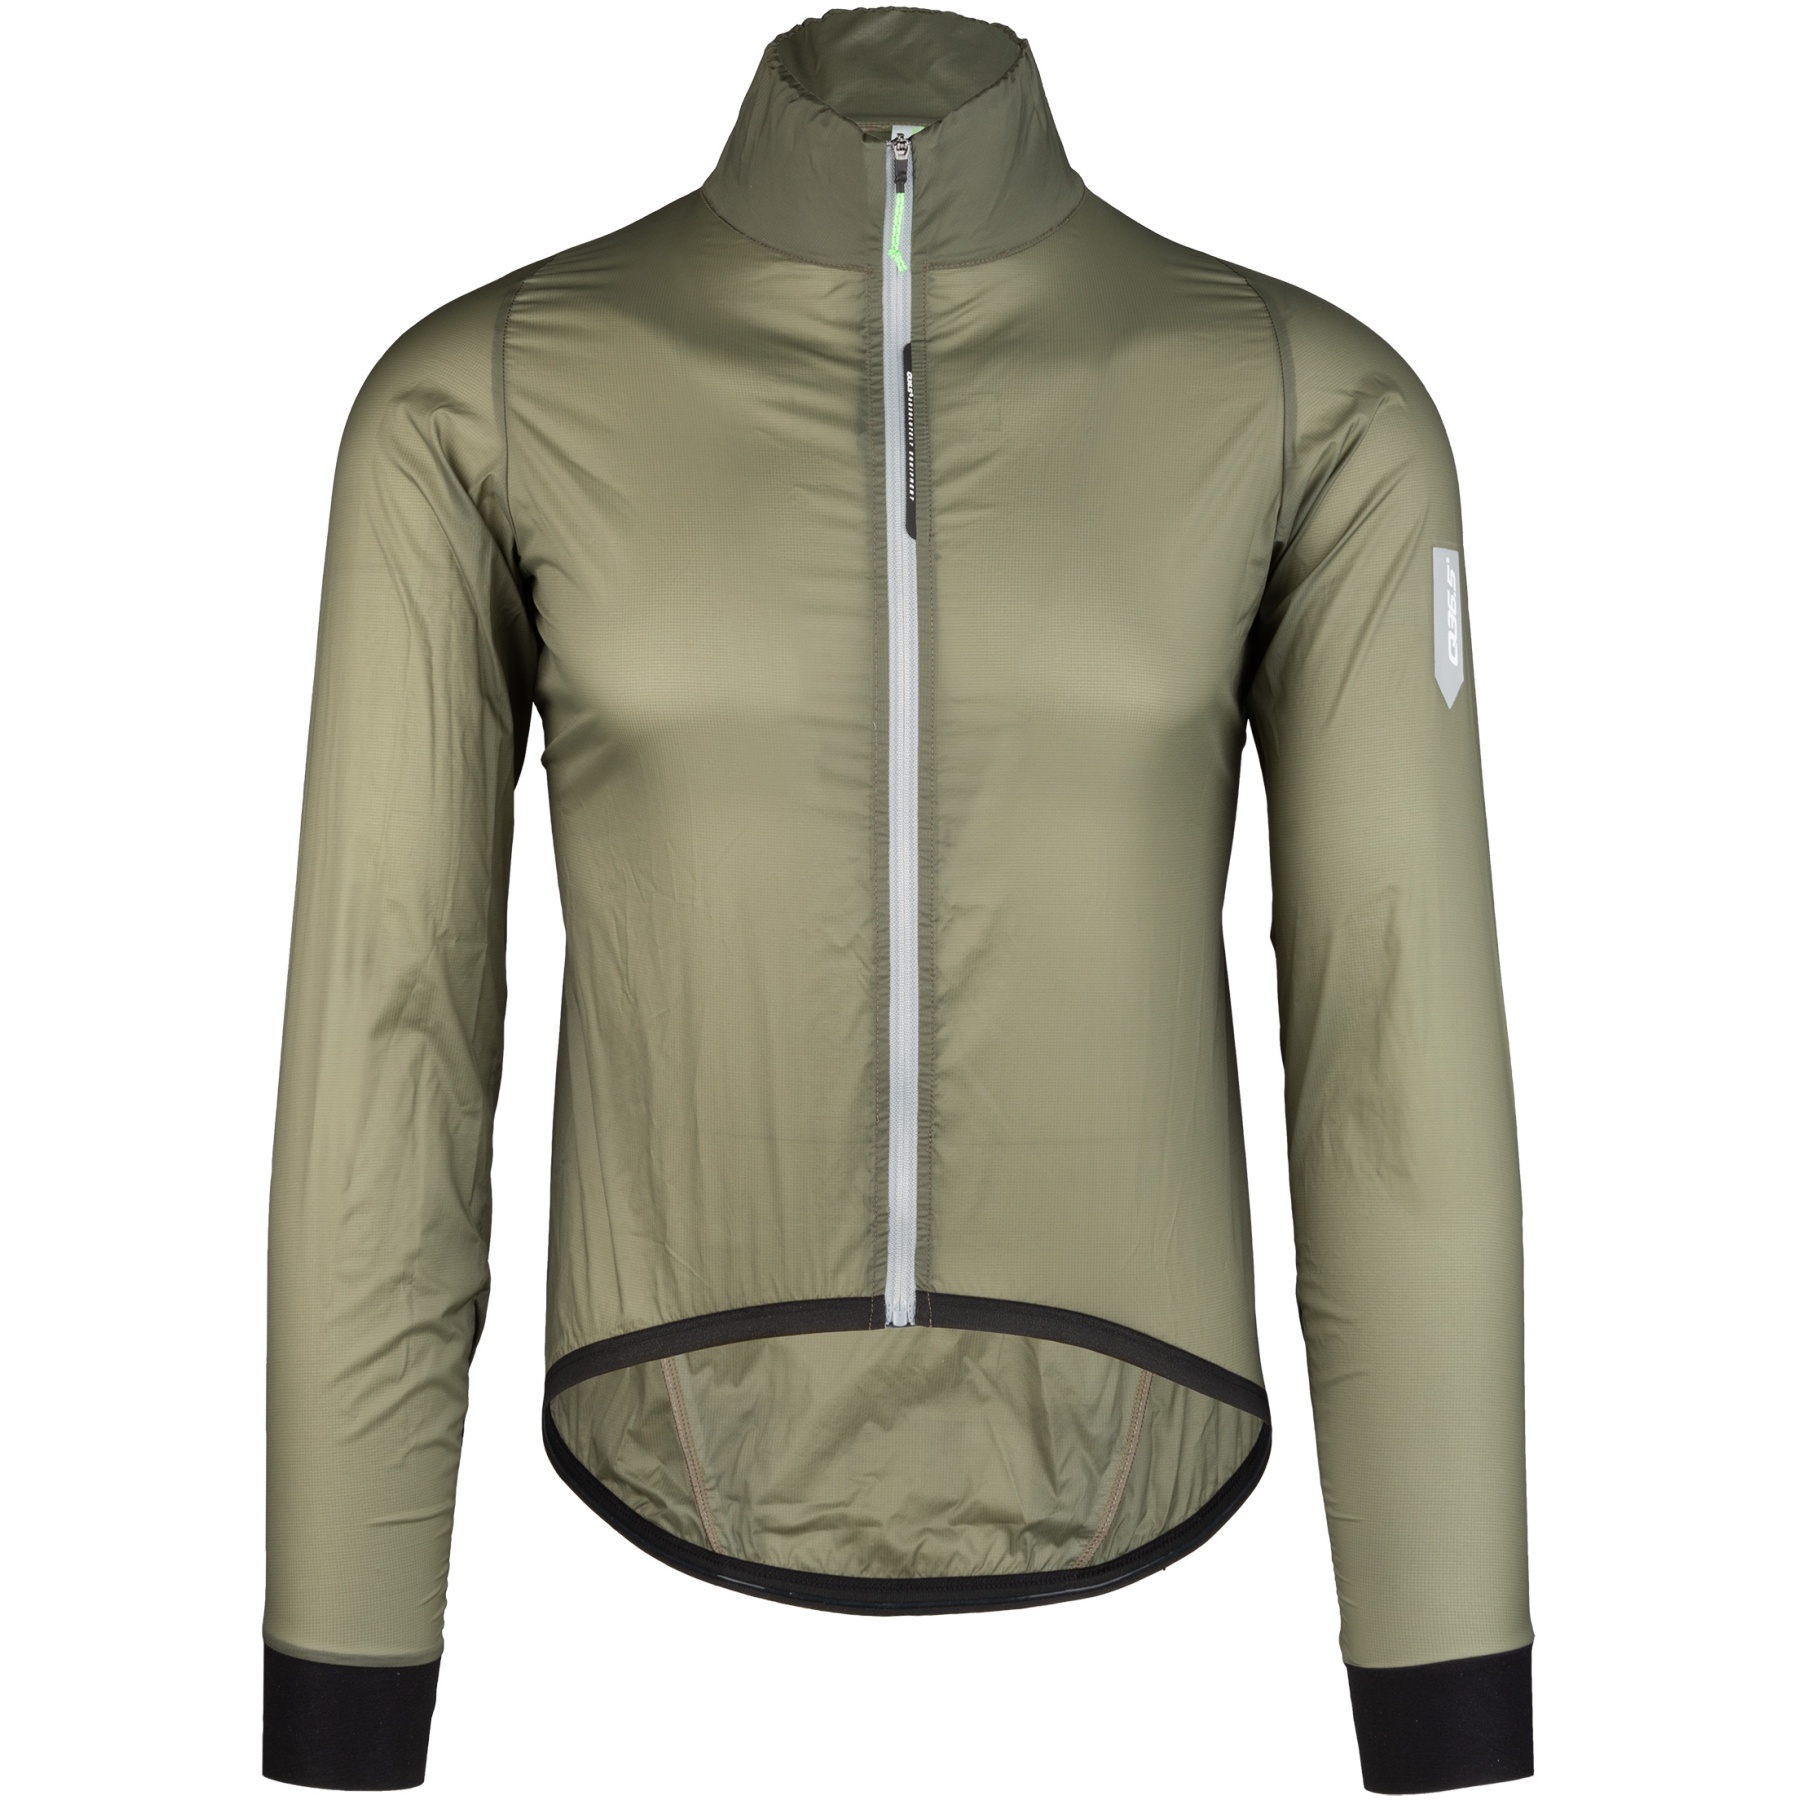 Image of Q36.5 Air Shell Jacket - olive green